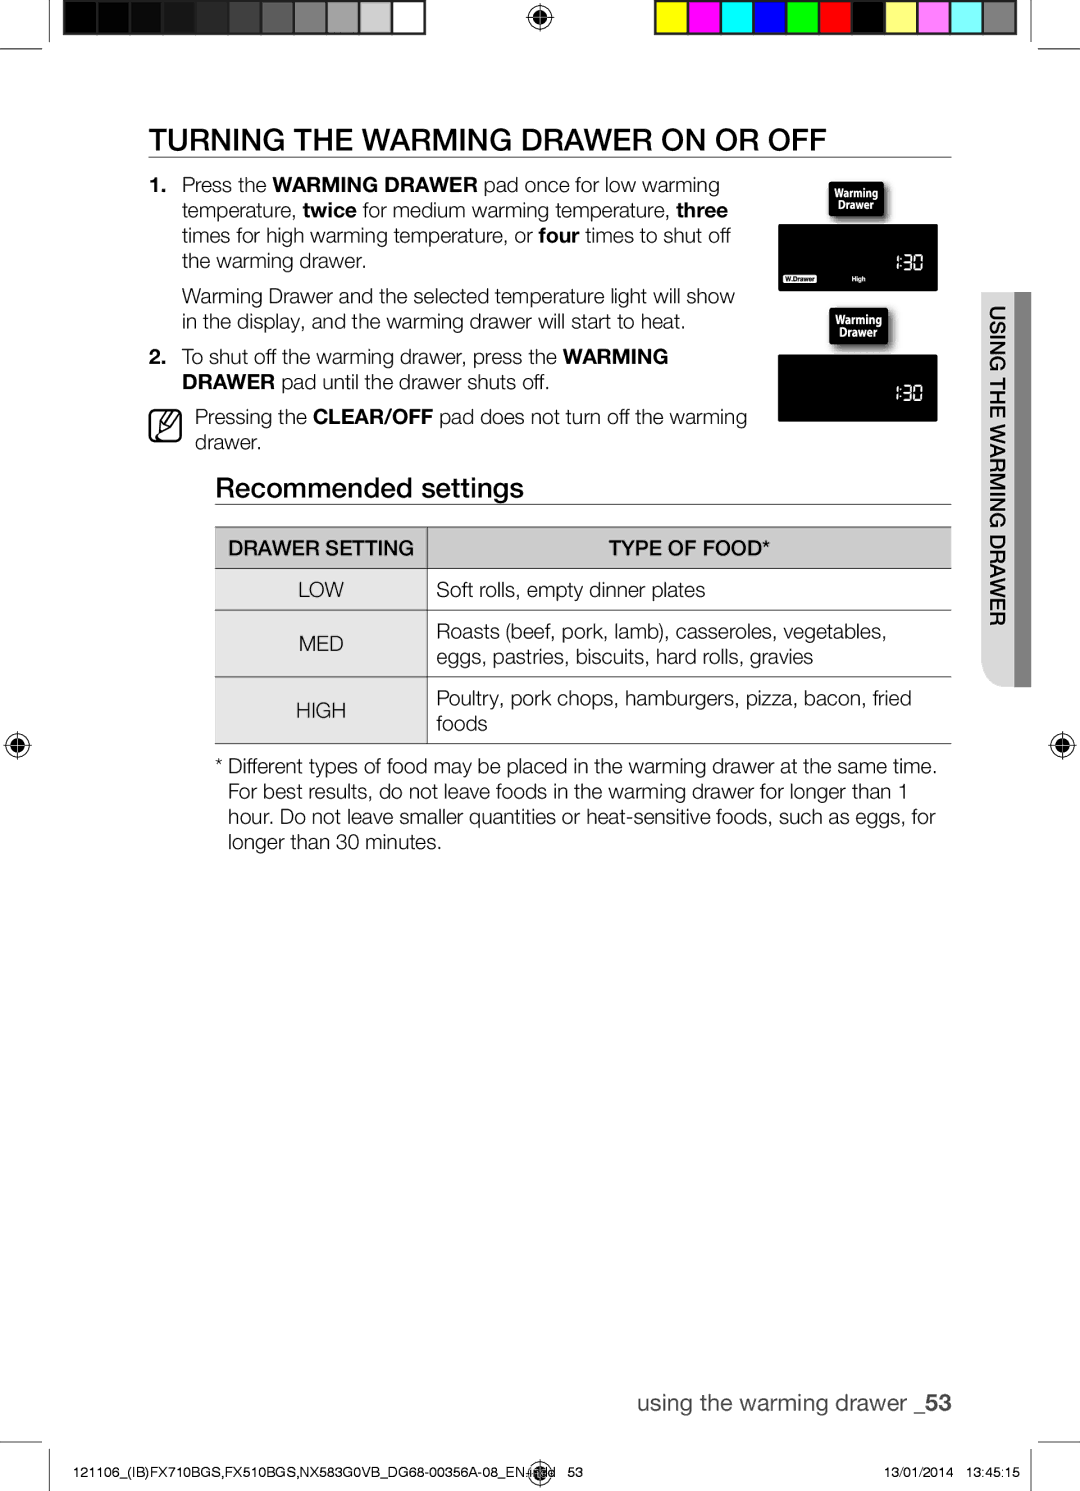 Samsung NX583G0VB user manual Turning the Warming Drawer on or OFF, Recommended settings, Drawer Setting Type of Food, Med 